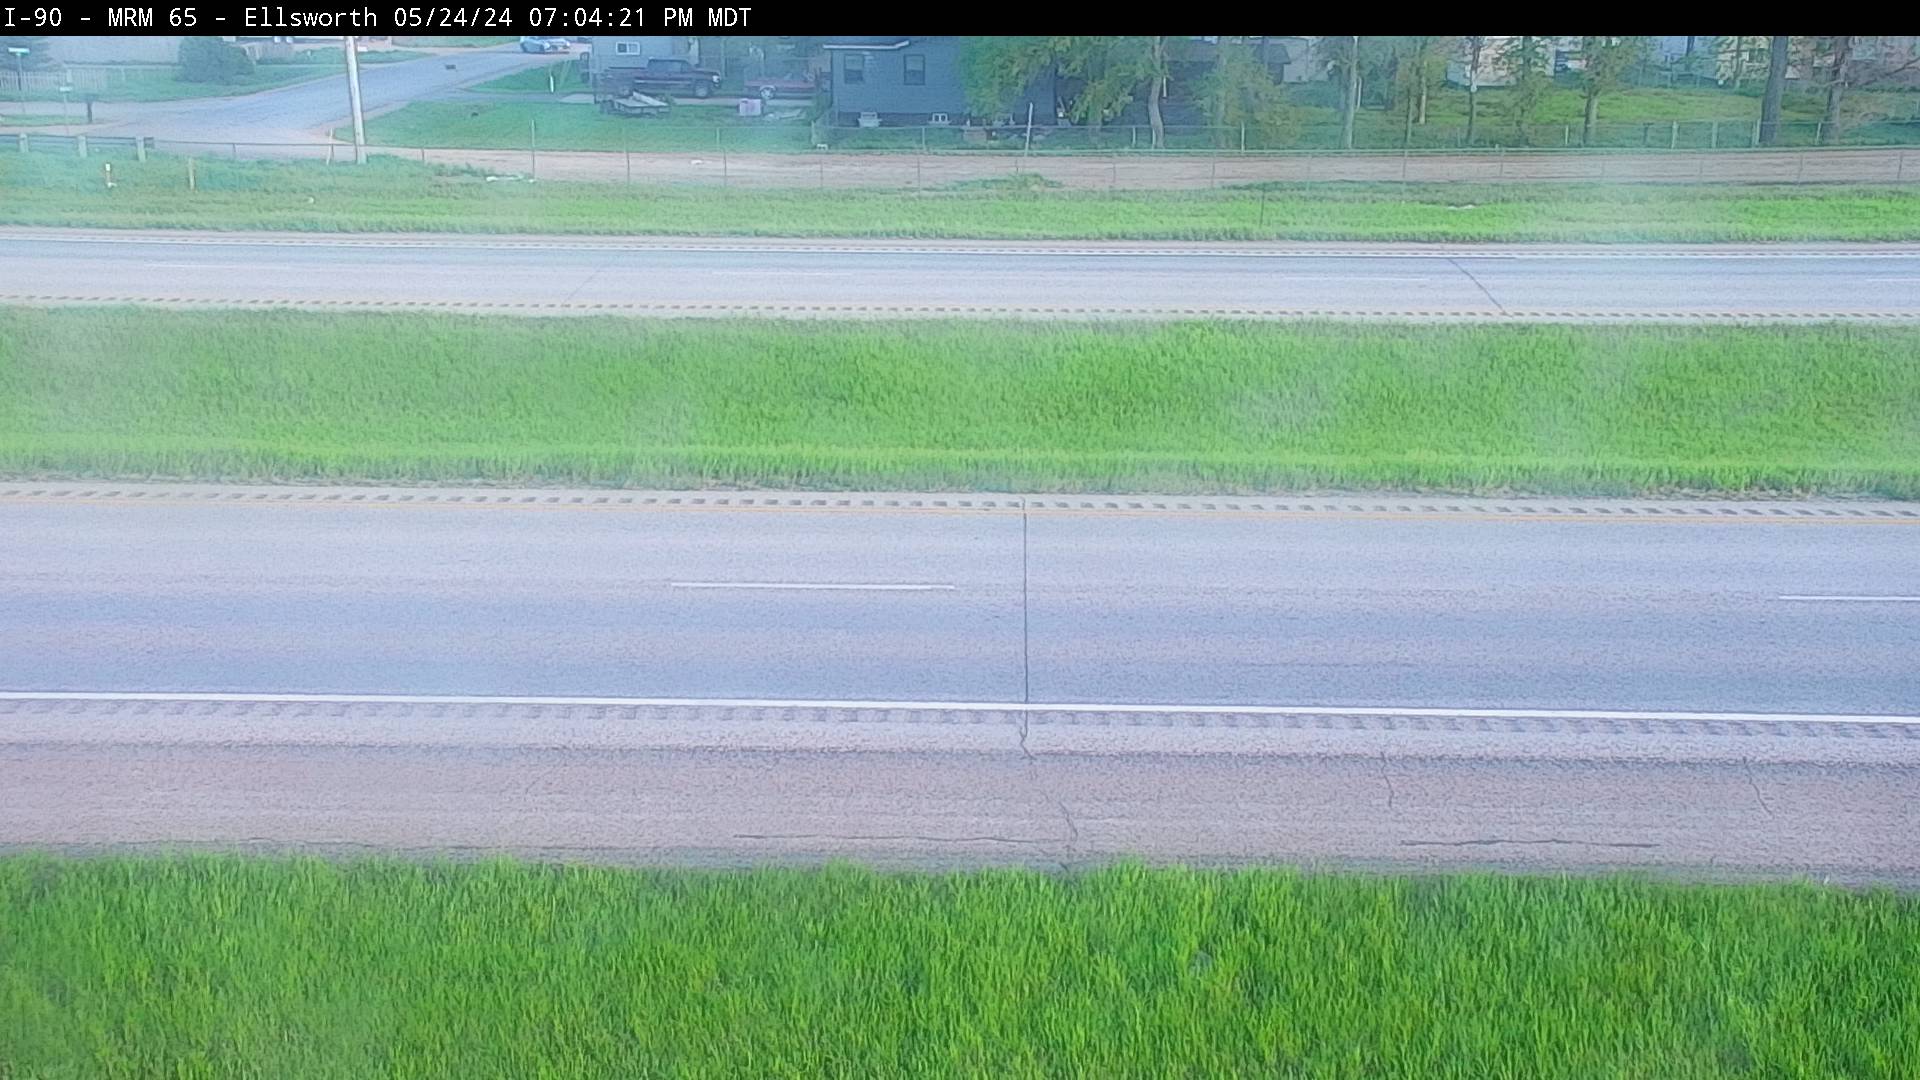 Traffic Cam 4 miles east of town along I-90 @ MP 65.2 - South Player